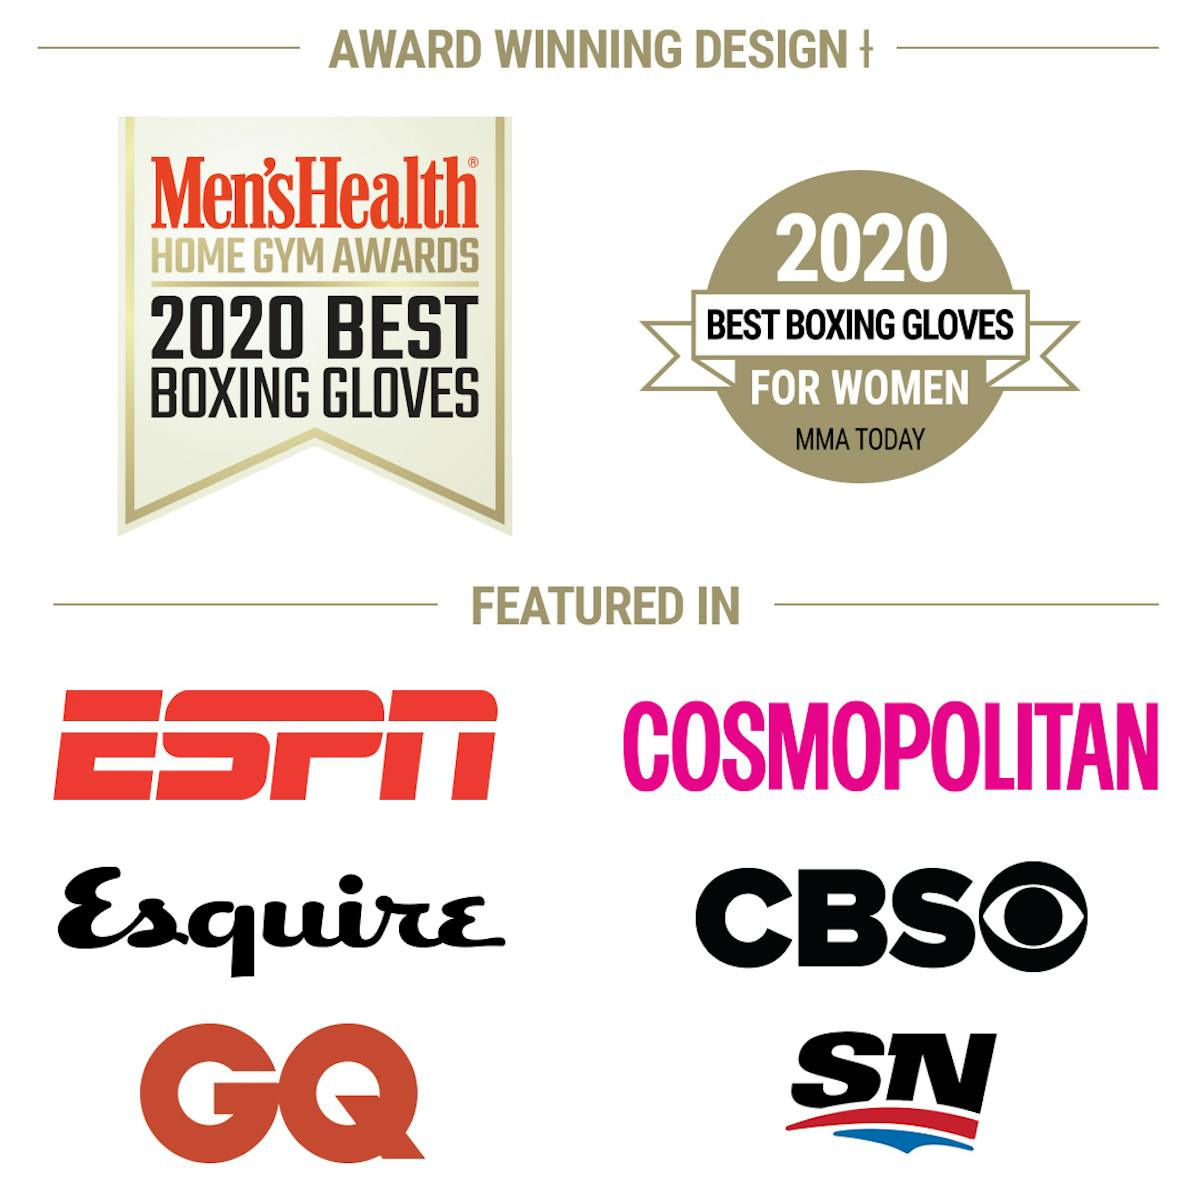 Award Winning Boxing Gloves - Men's Health & MMA Today - Featured in ESPN, Cosmopolitan, Esquire, Sports News, GQ and CBS